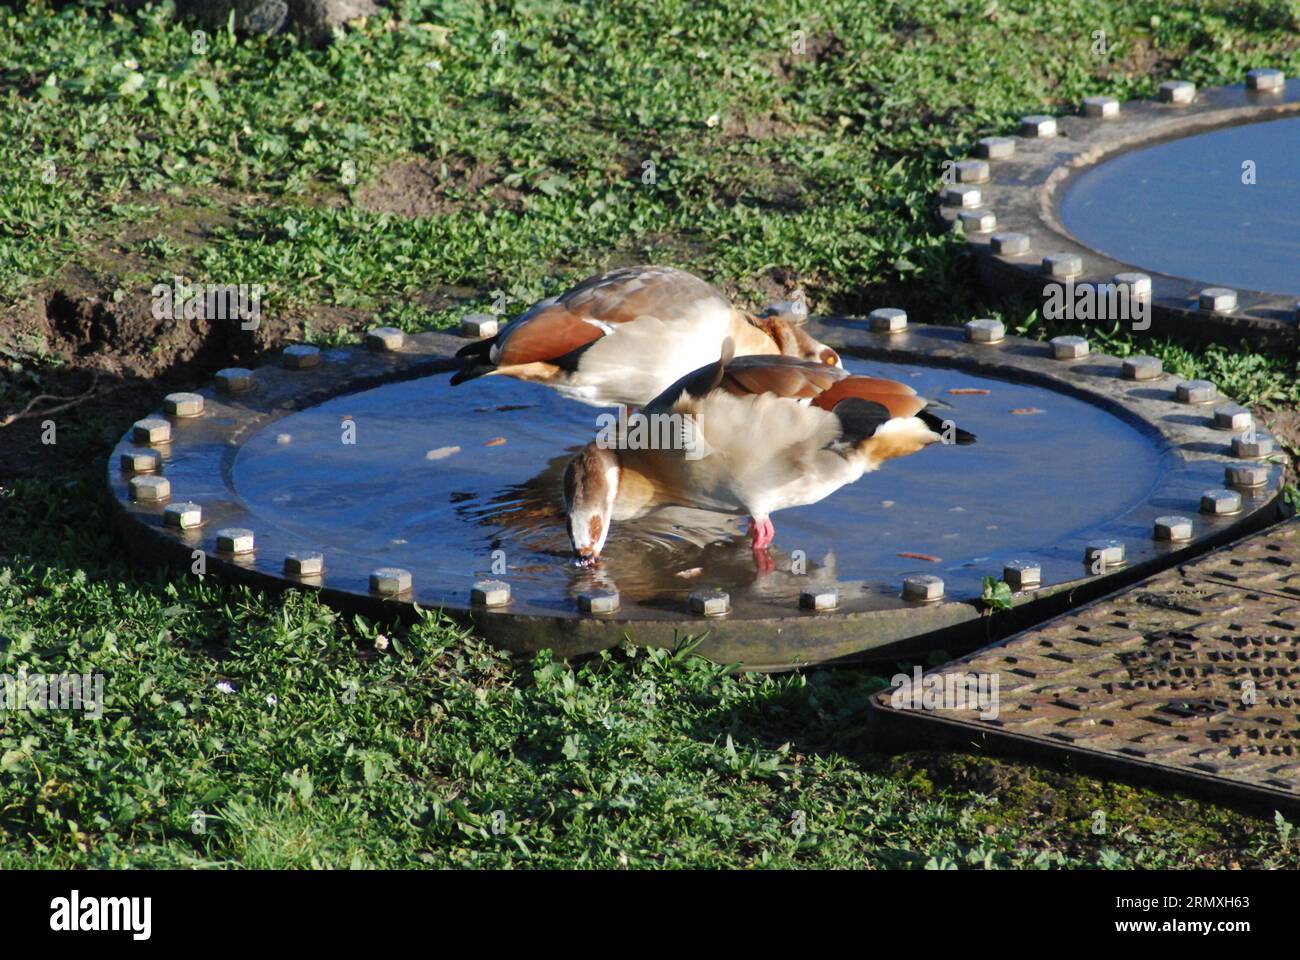 A pair of Egyptian geese (Alopochen aegyptiaca) drinking water in industrial area. This ornamental duck has been introduced outside its native Africa. Stock Photo